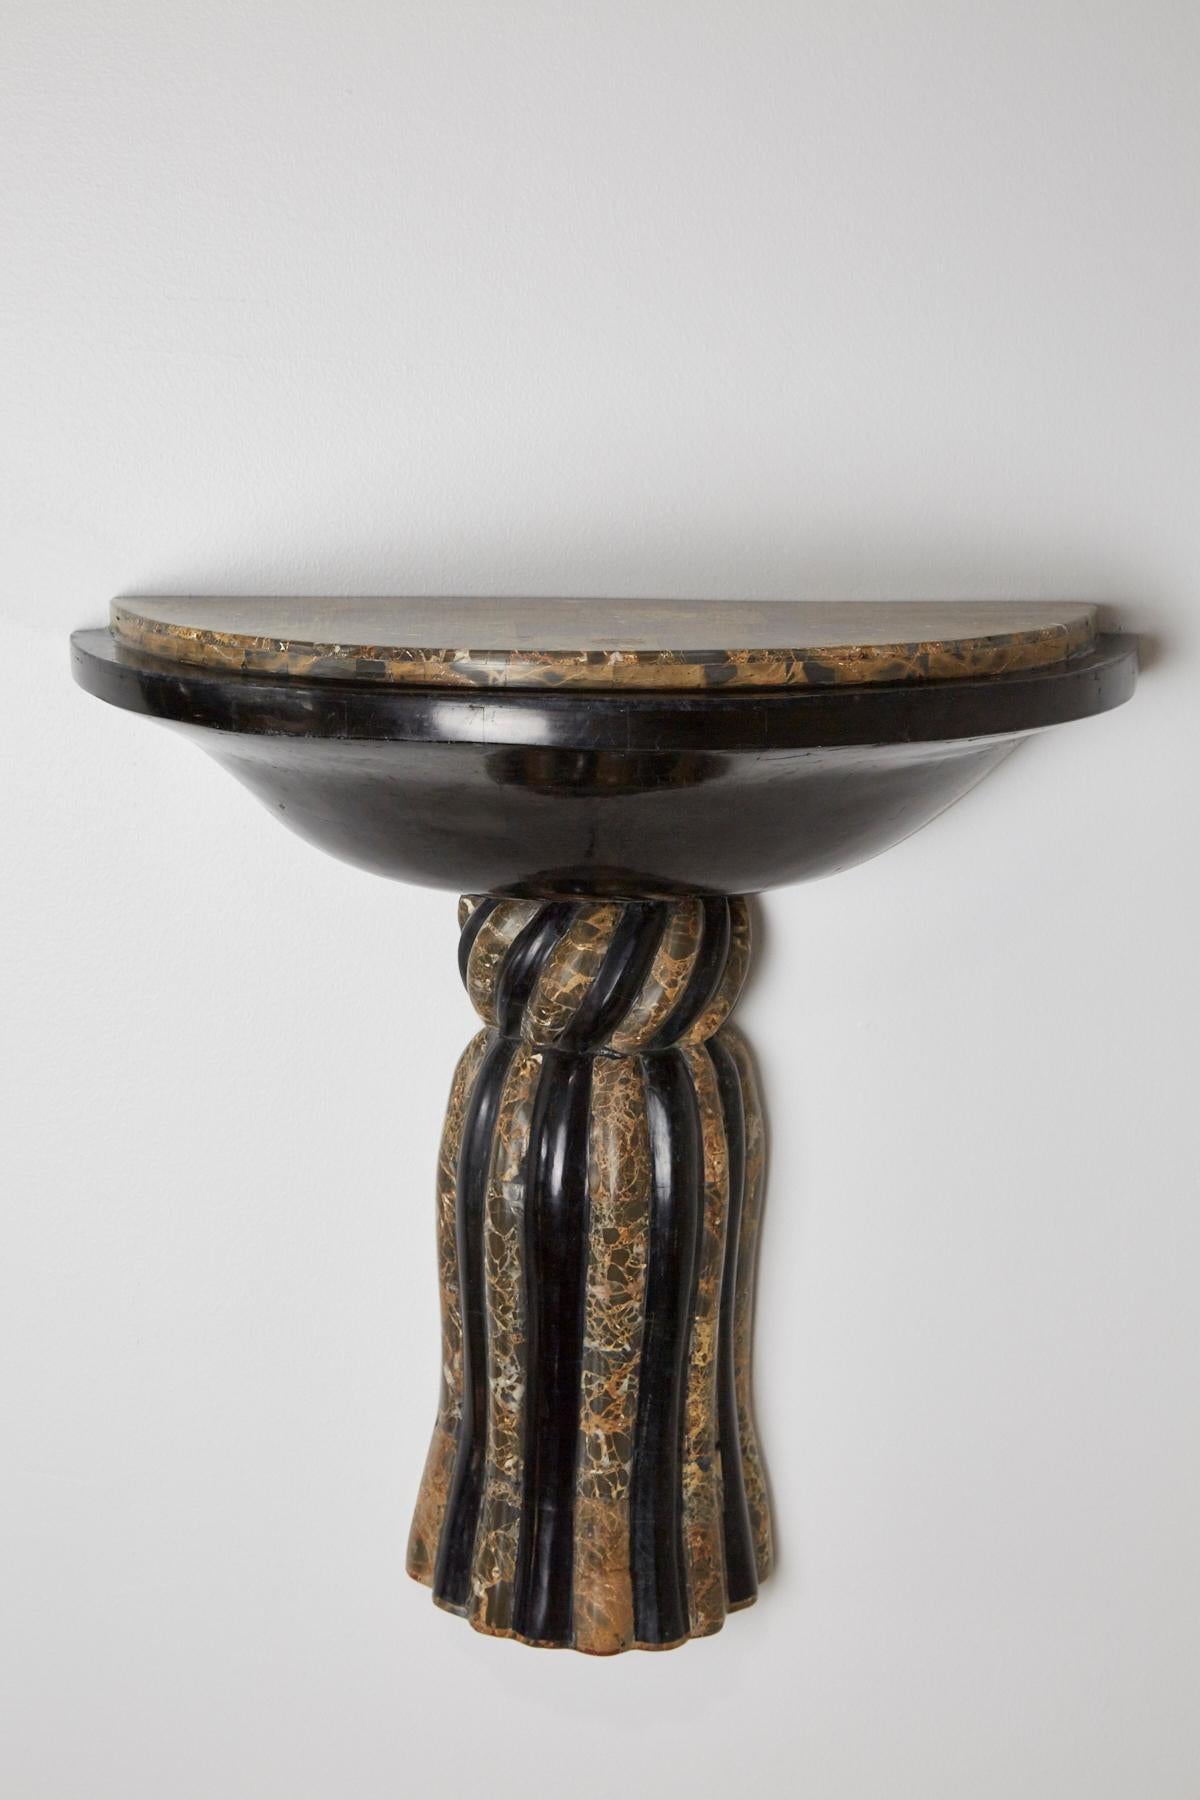 Wall-mounted shelf or wall bracket executed in black and snakeskin stone with decorative trompe l'oeil tassel detailing.

All furnishings are made from 100% natural Fossil Stone or Seashell inlay, carefully hand cut and crafted piece-by-piece and